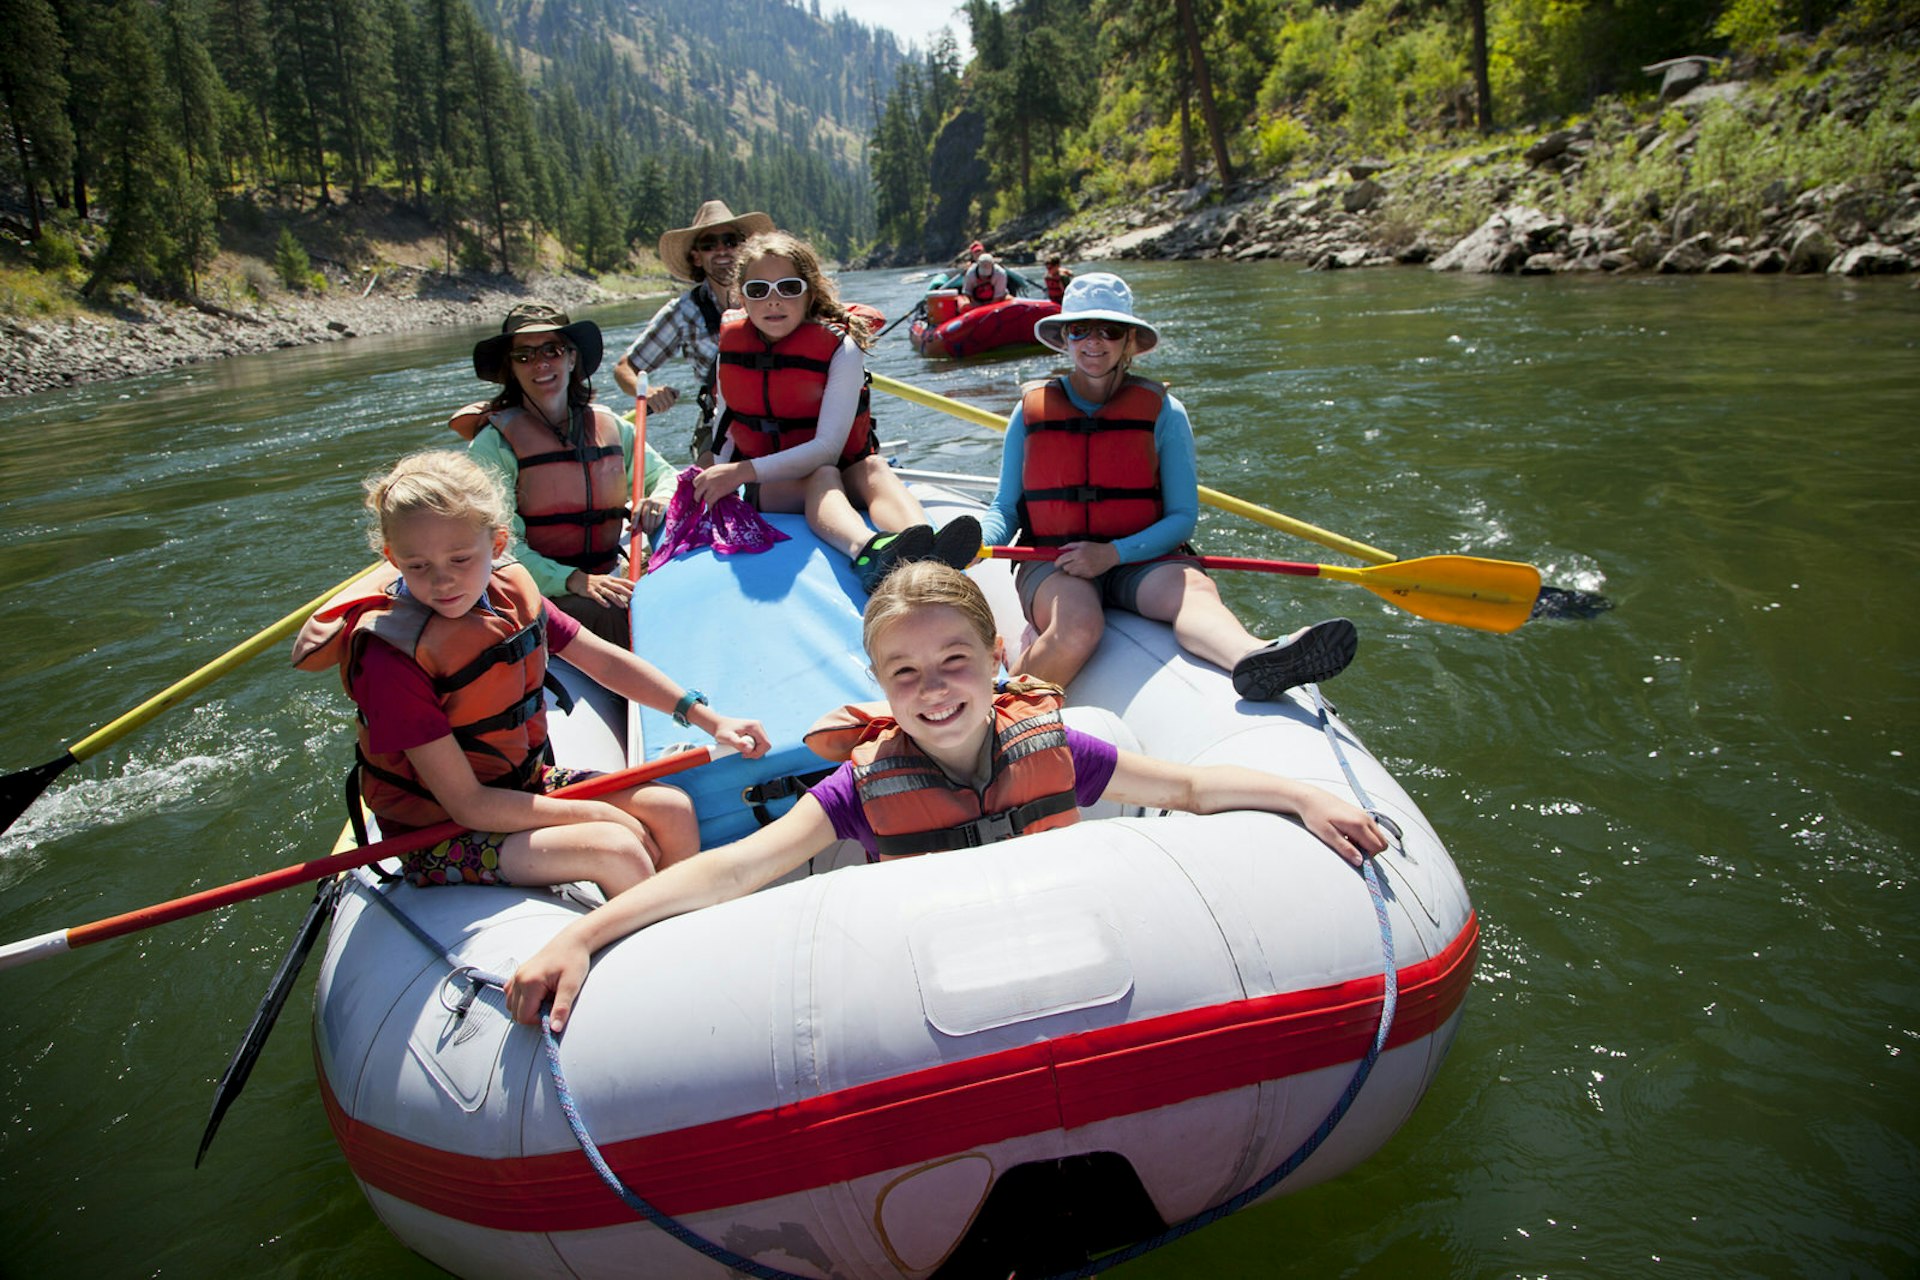 A group of kids smile as they ride in a whitewater raft down a green river in a canyon in Idaho.